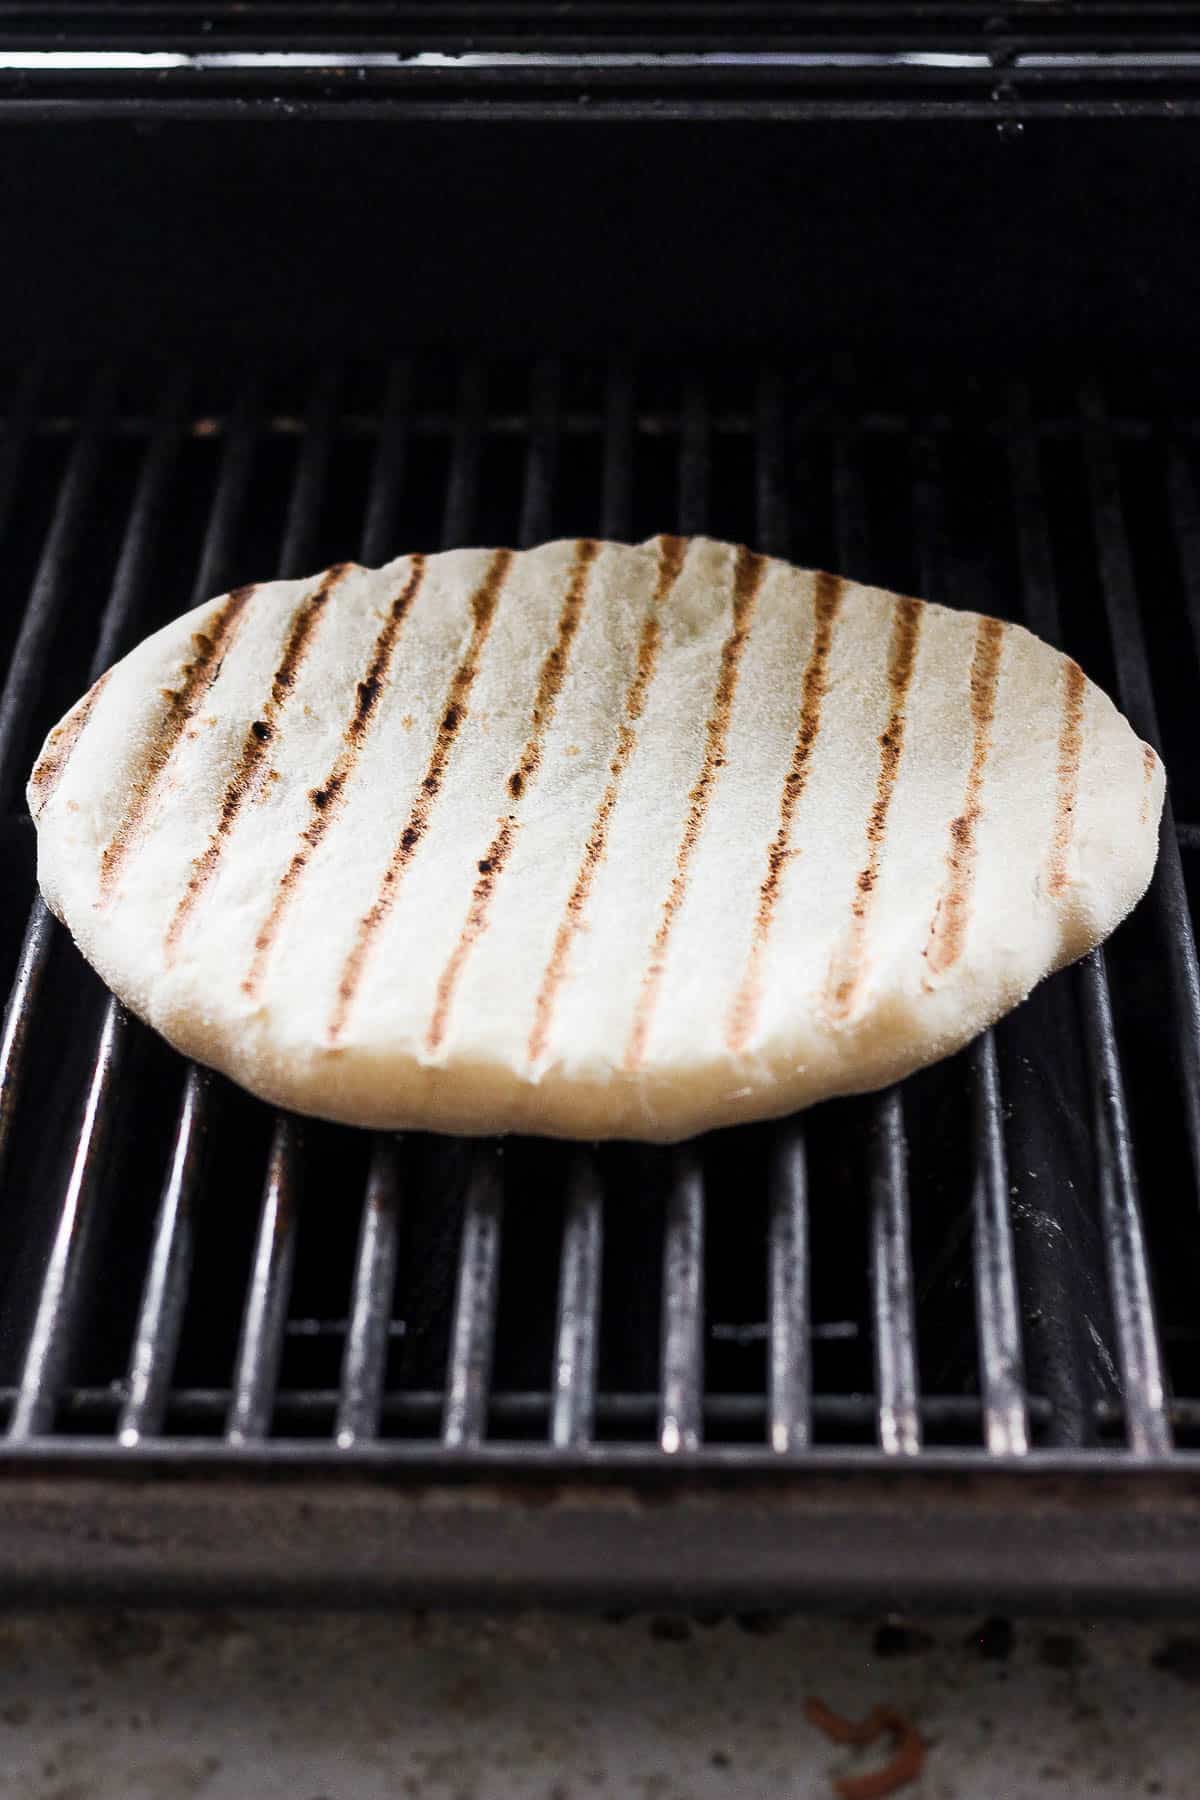 Pizza crust after being flipped on the grill.